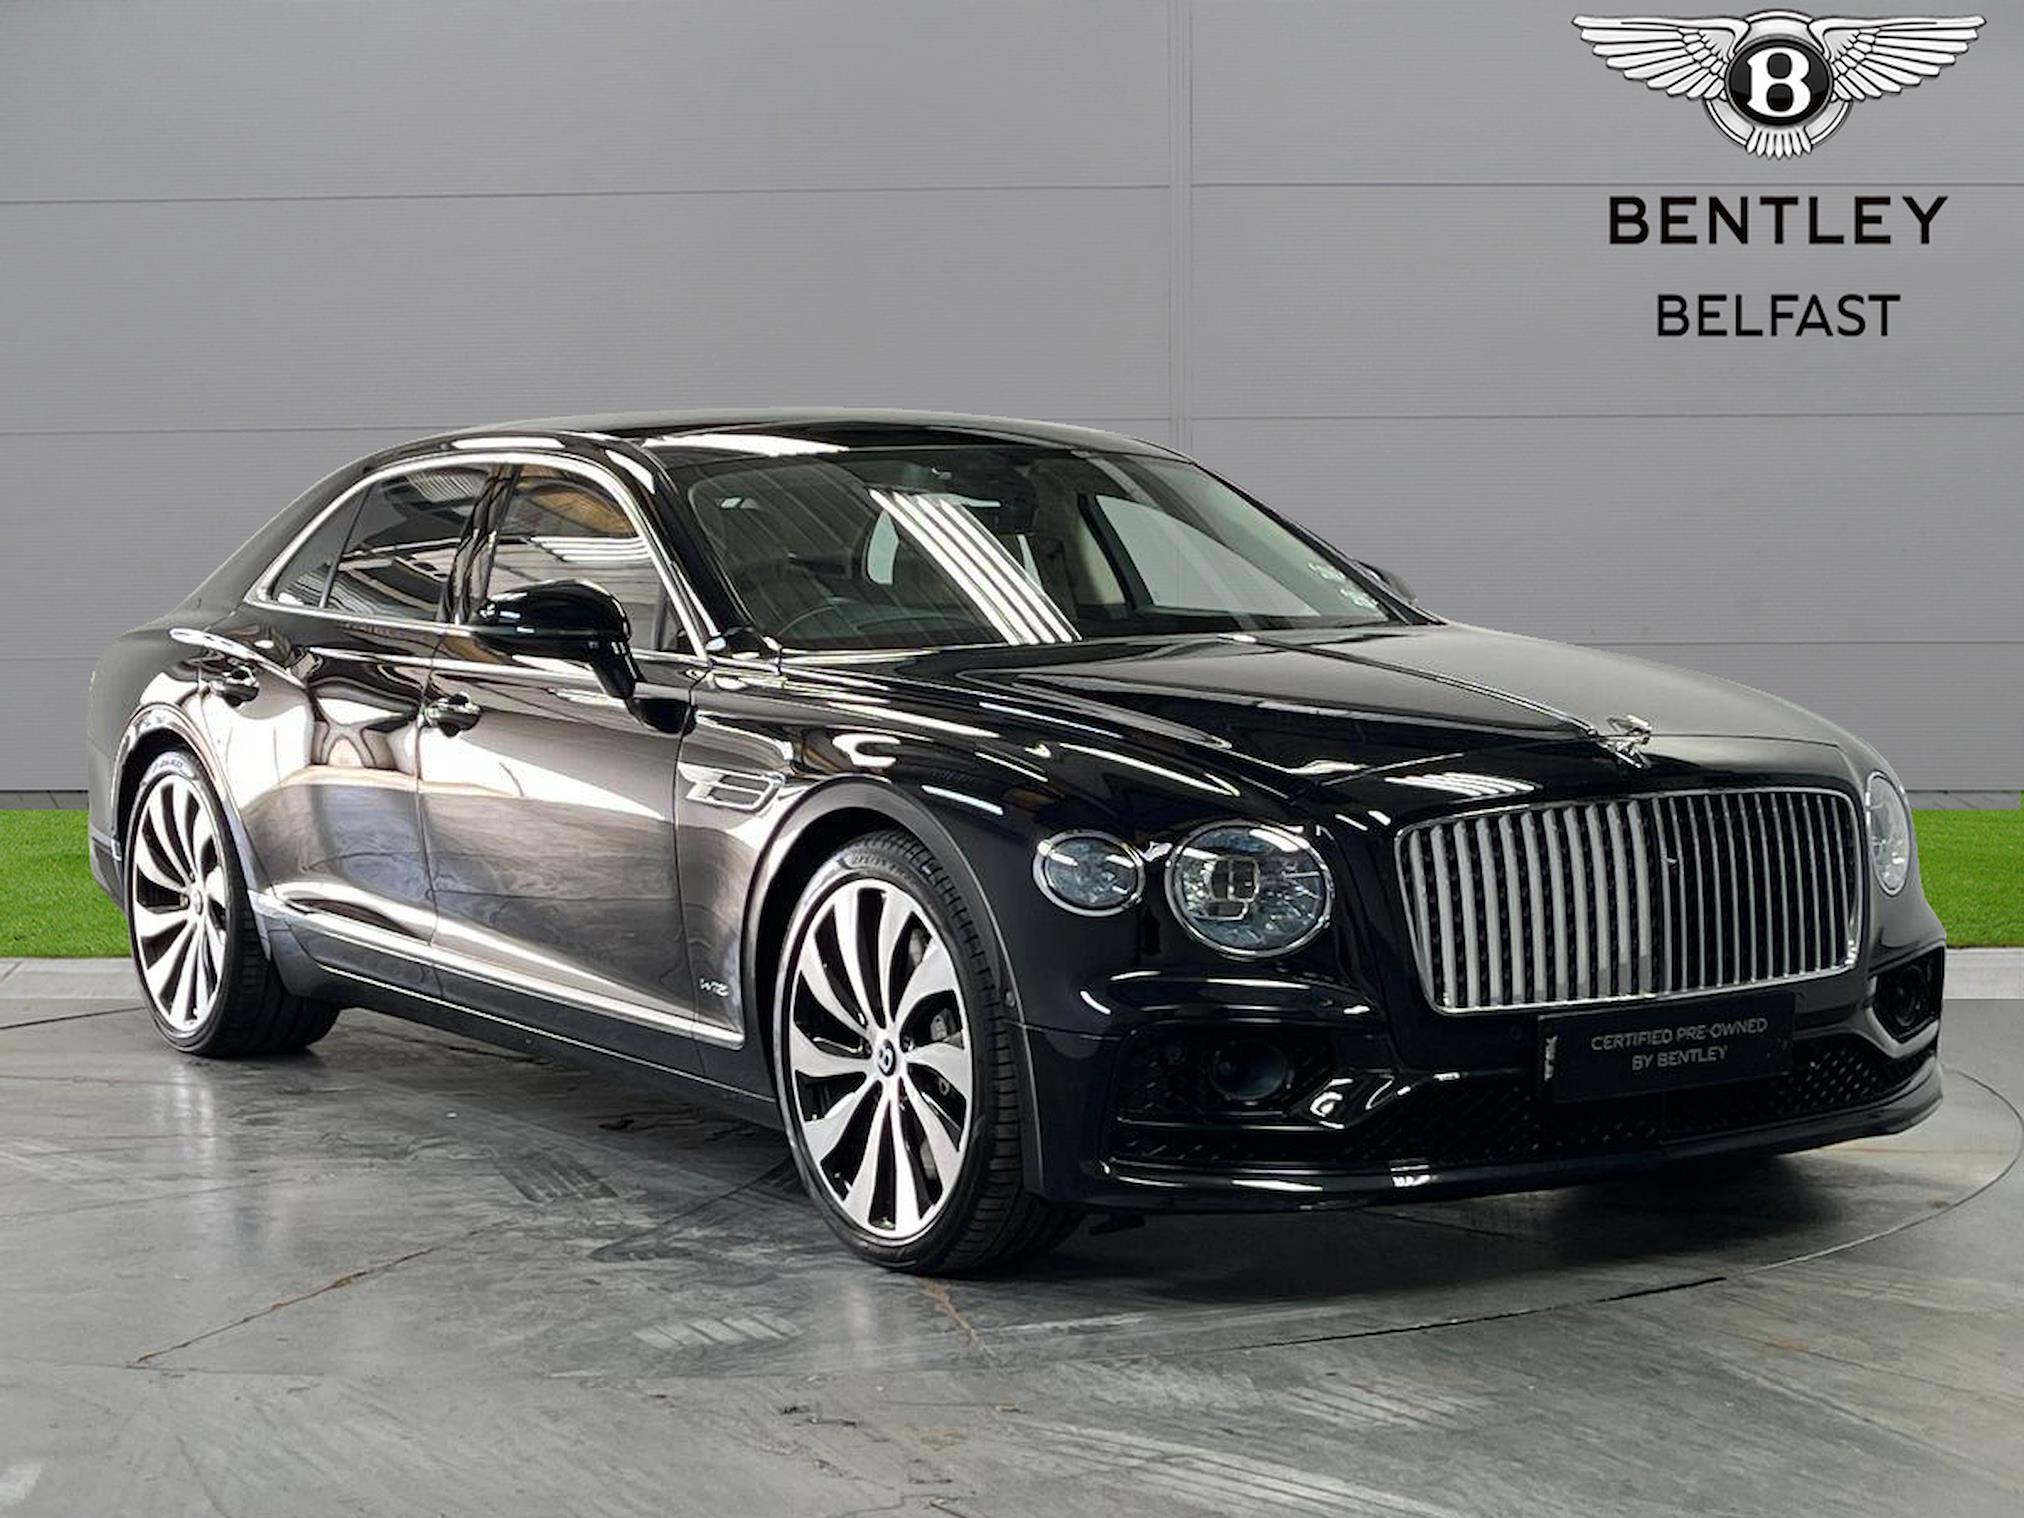 BENTLEY FLYING SPUR SALOON SPECIAL EDITIONS